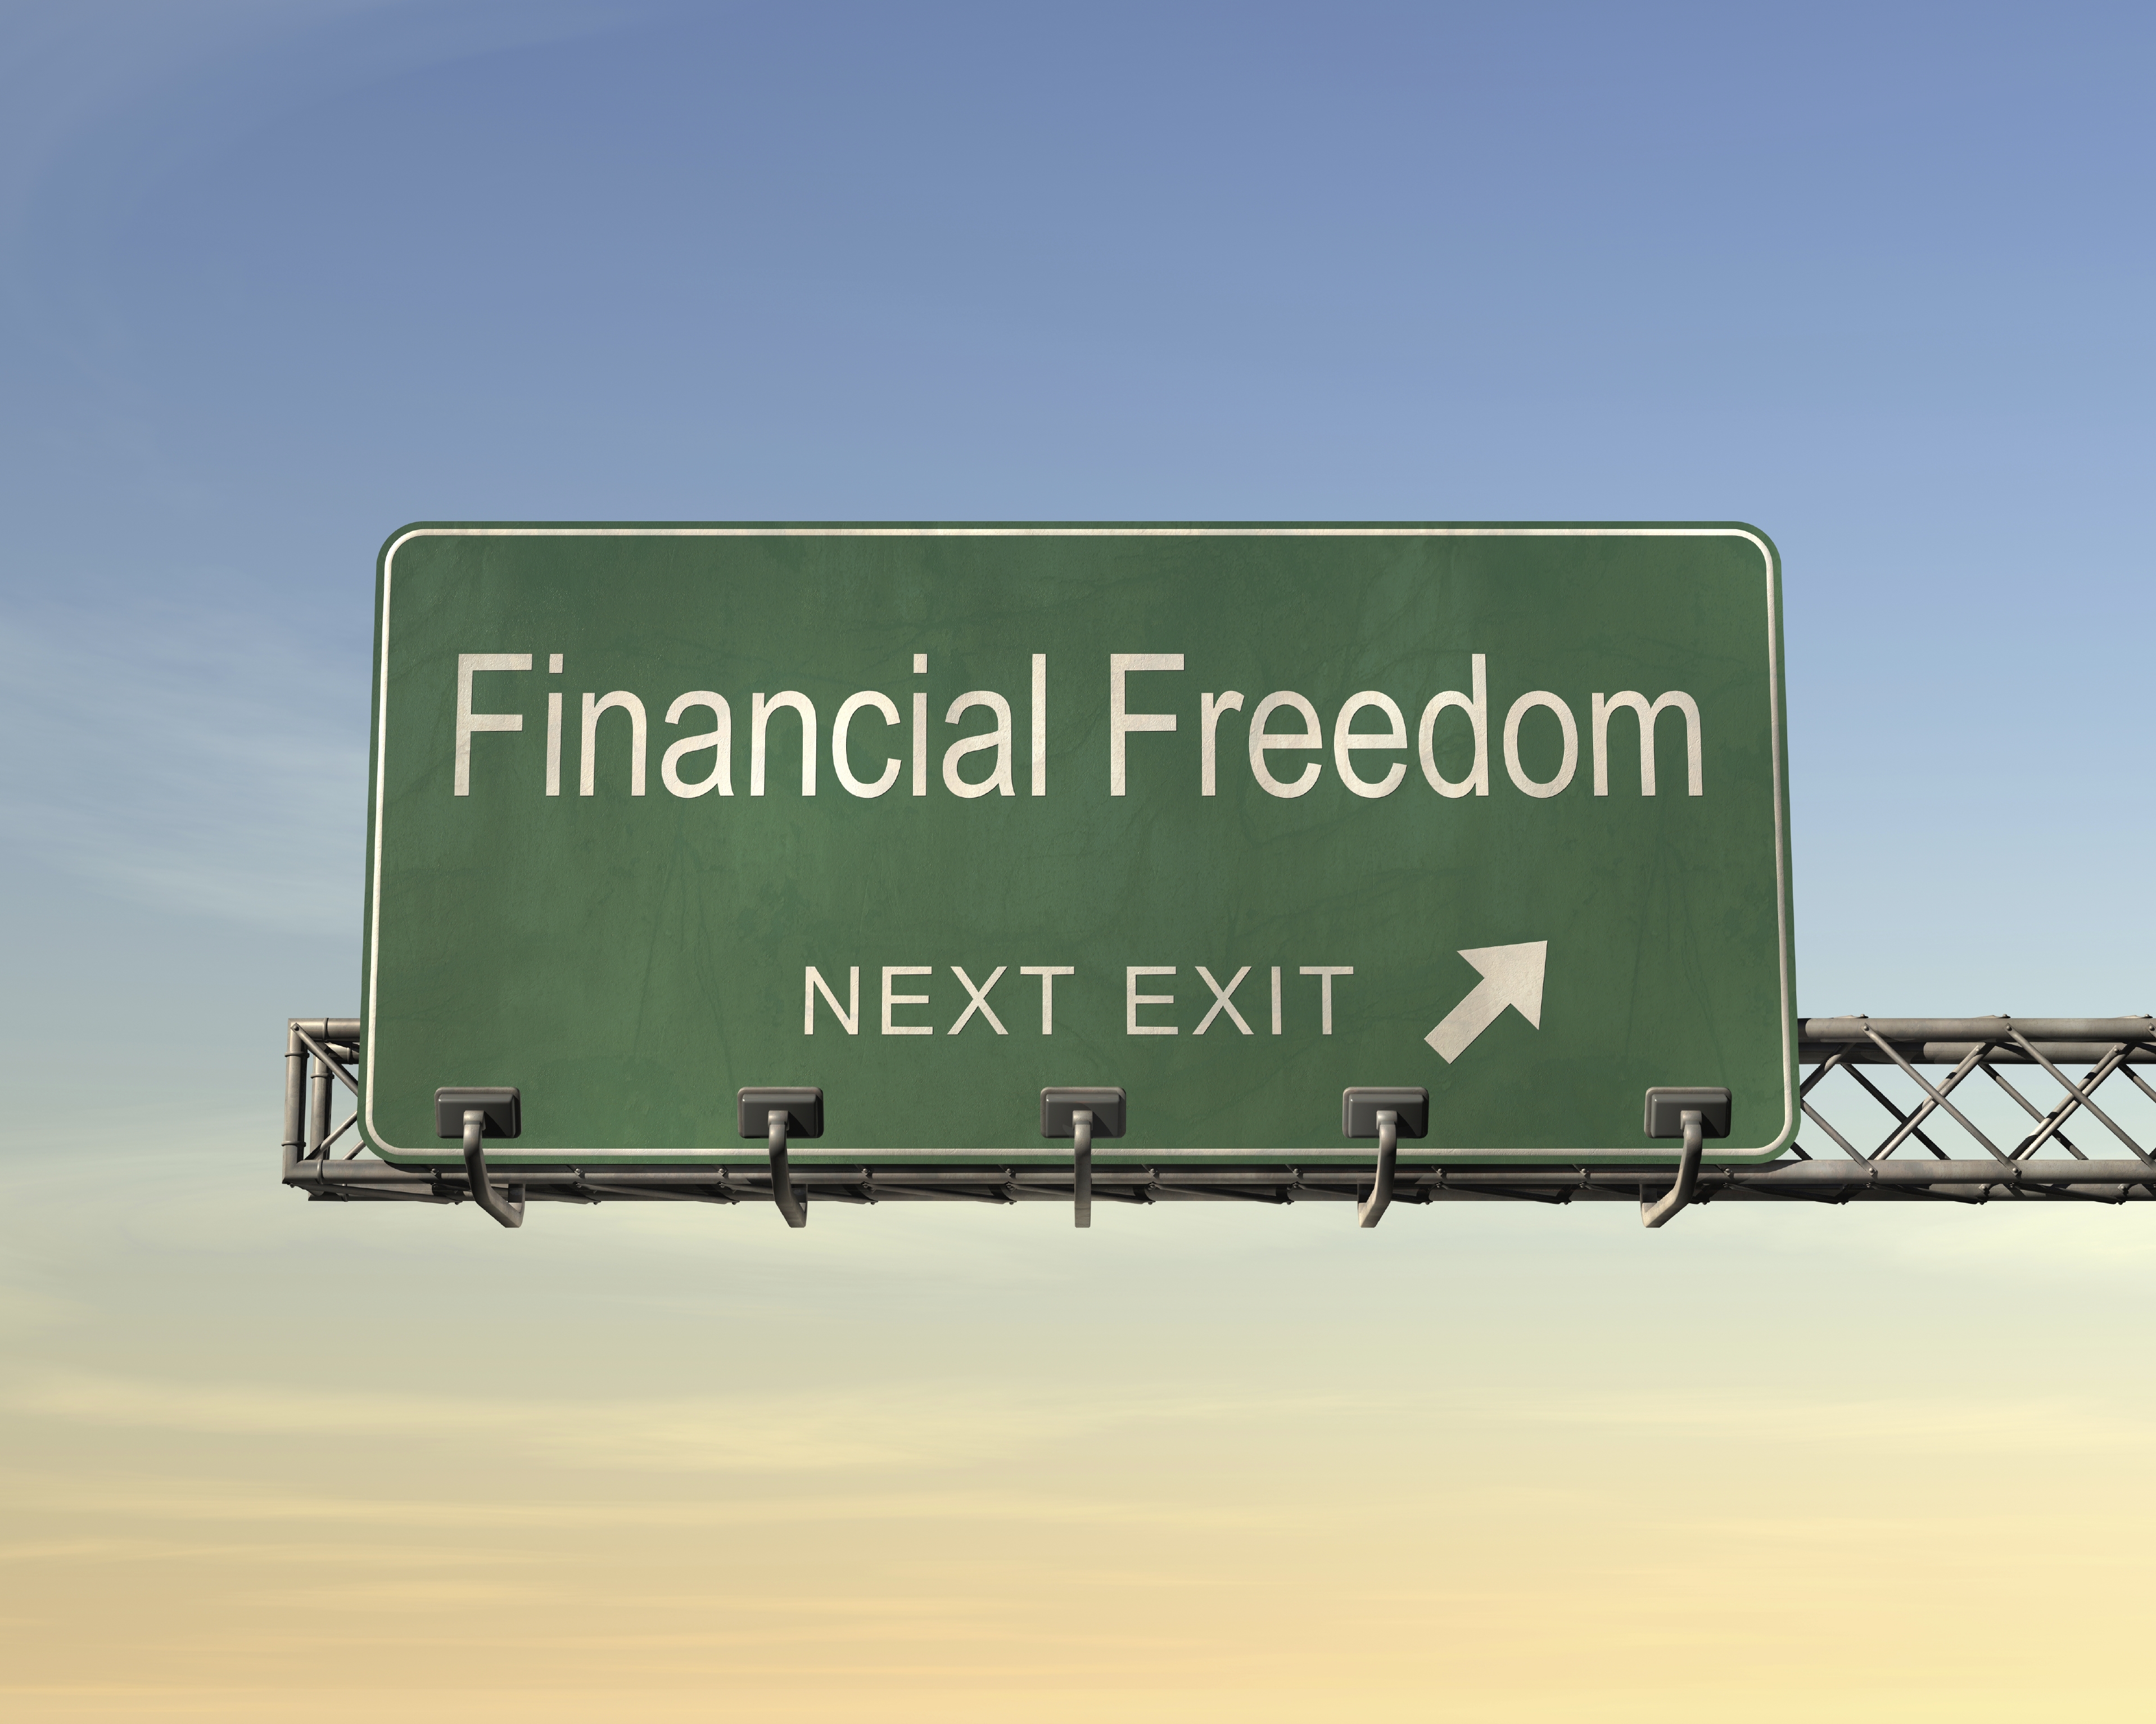 Financial Freedom, Next Exit!